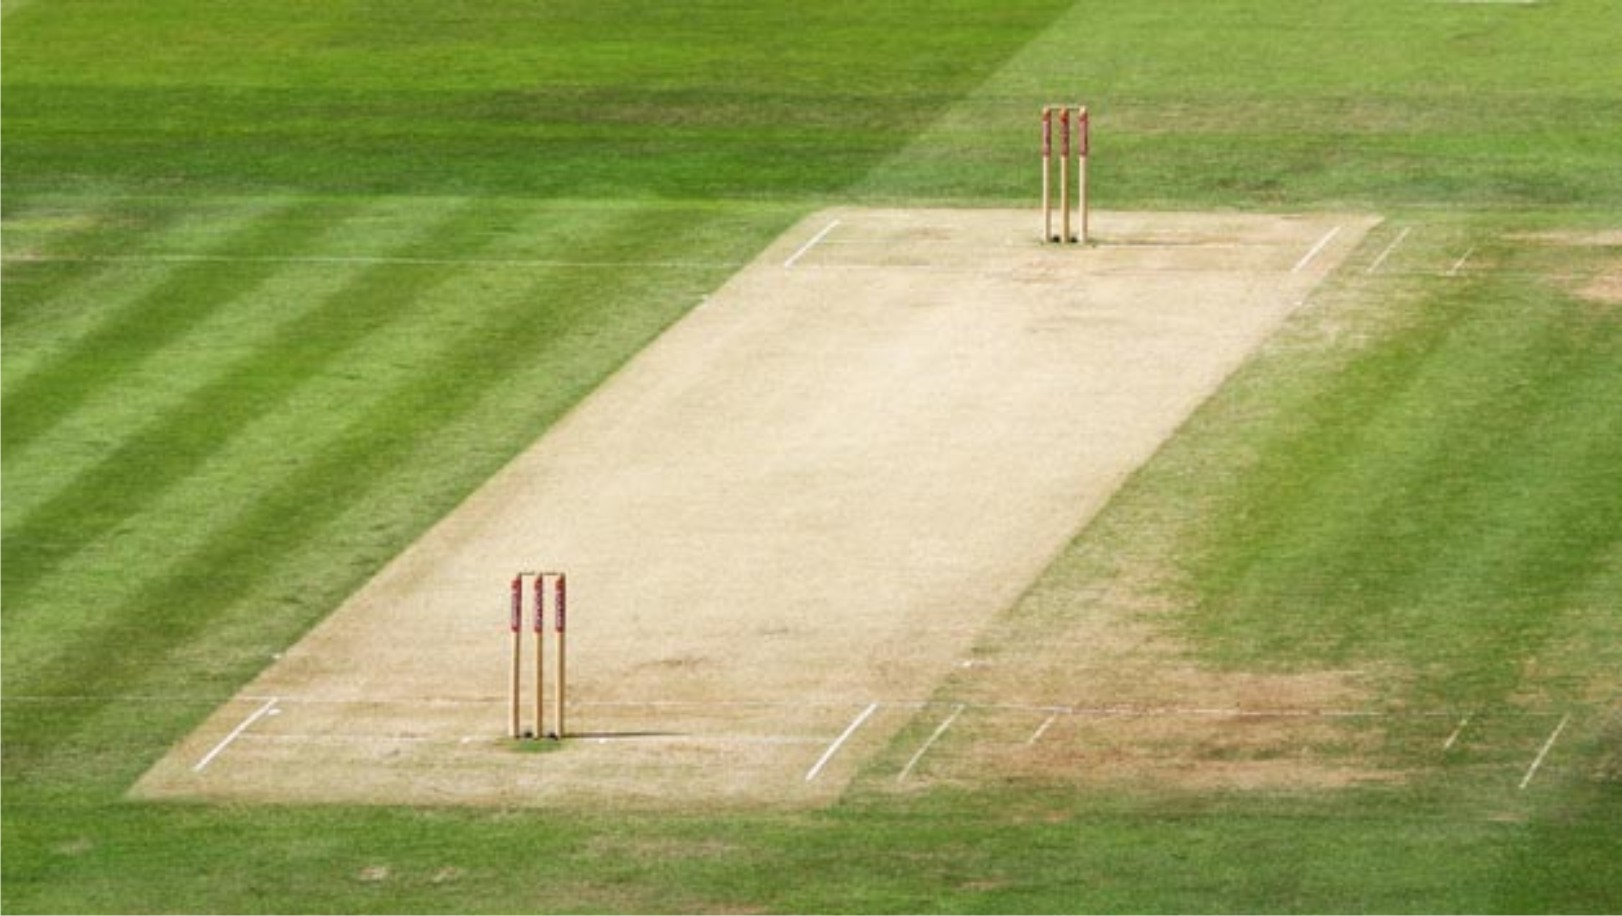 Pitches in ODI Cricket